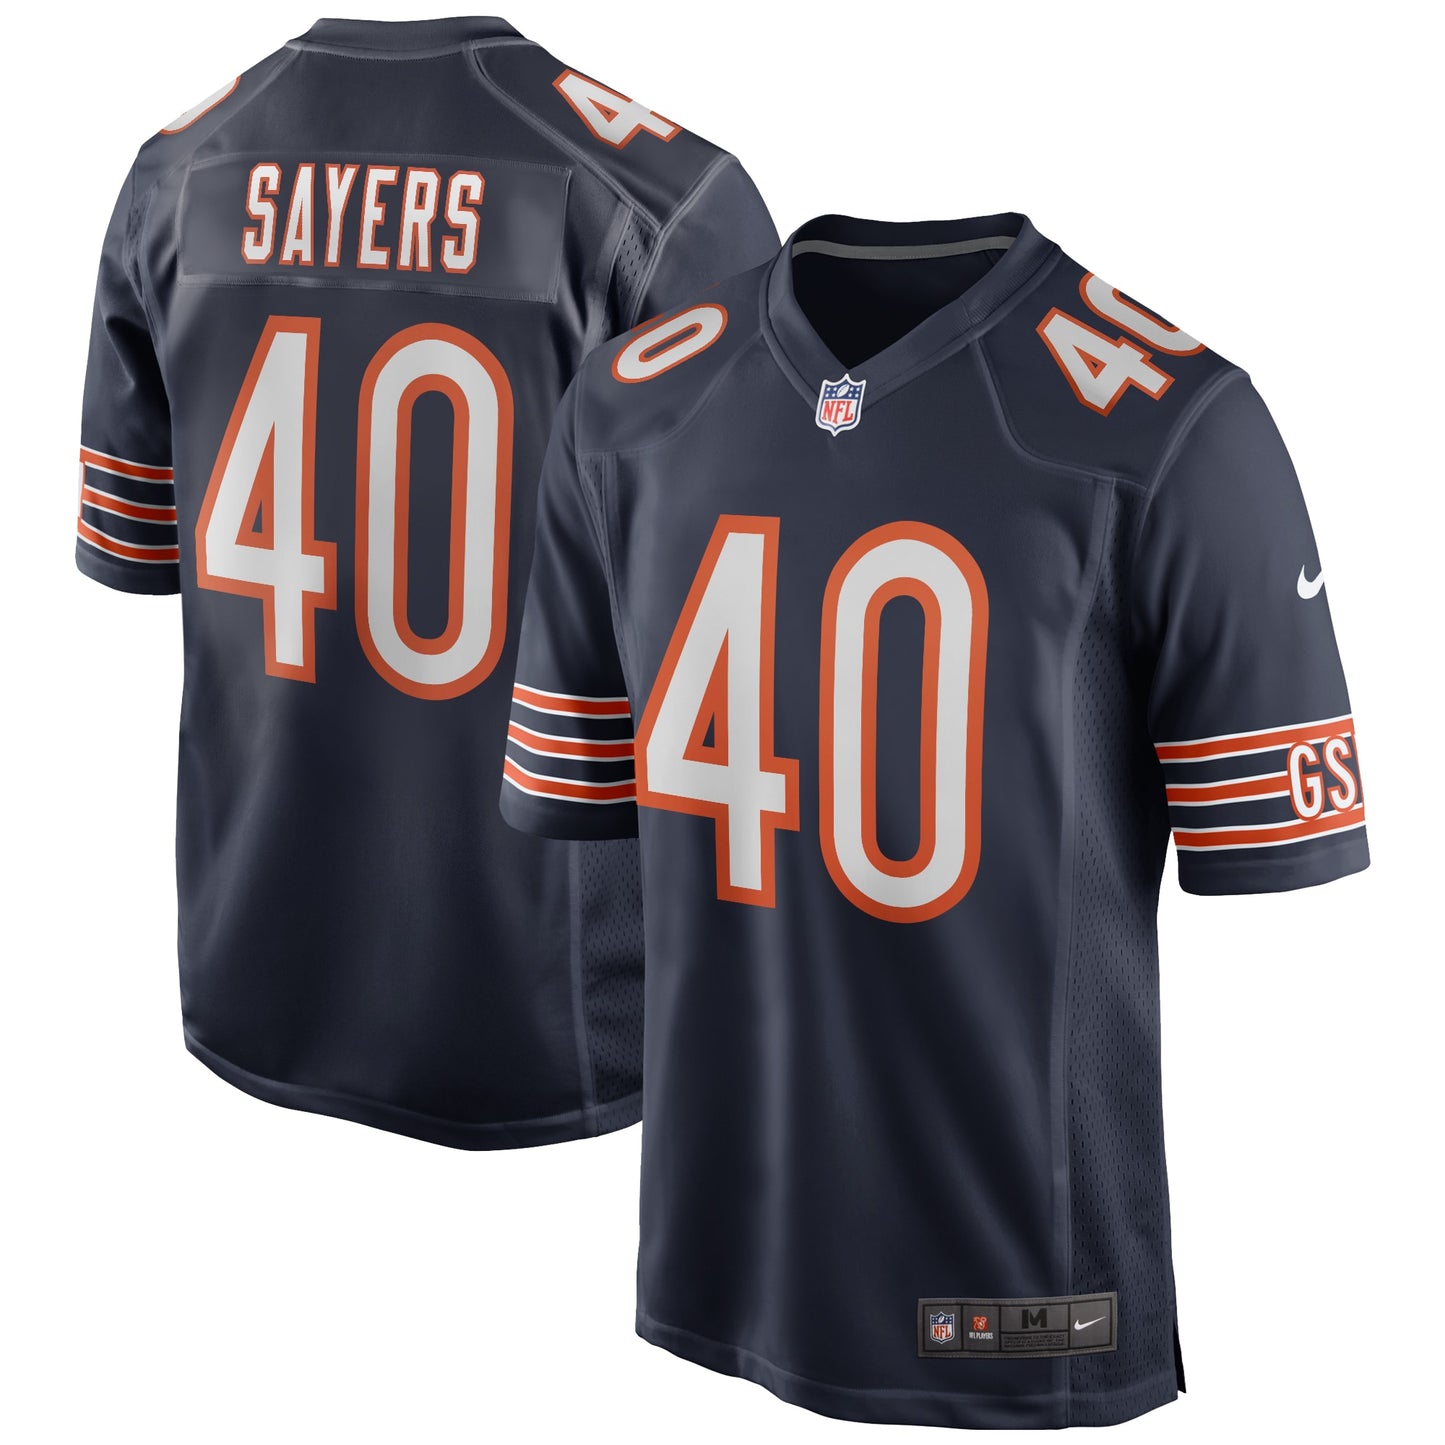 Gale Sayers Chicago Bears Nike Game Retired Player Jersey - Navy